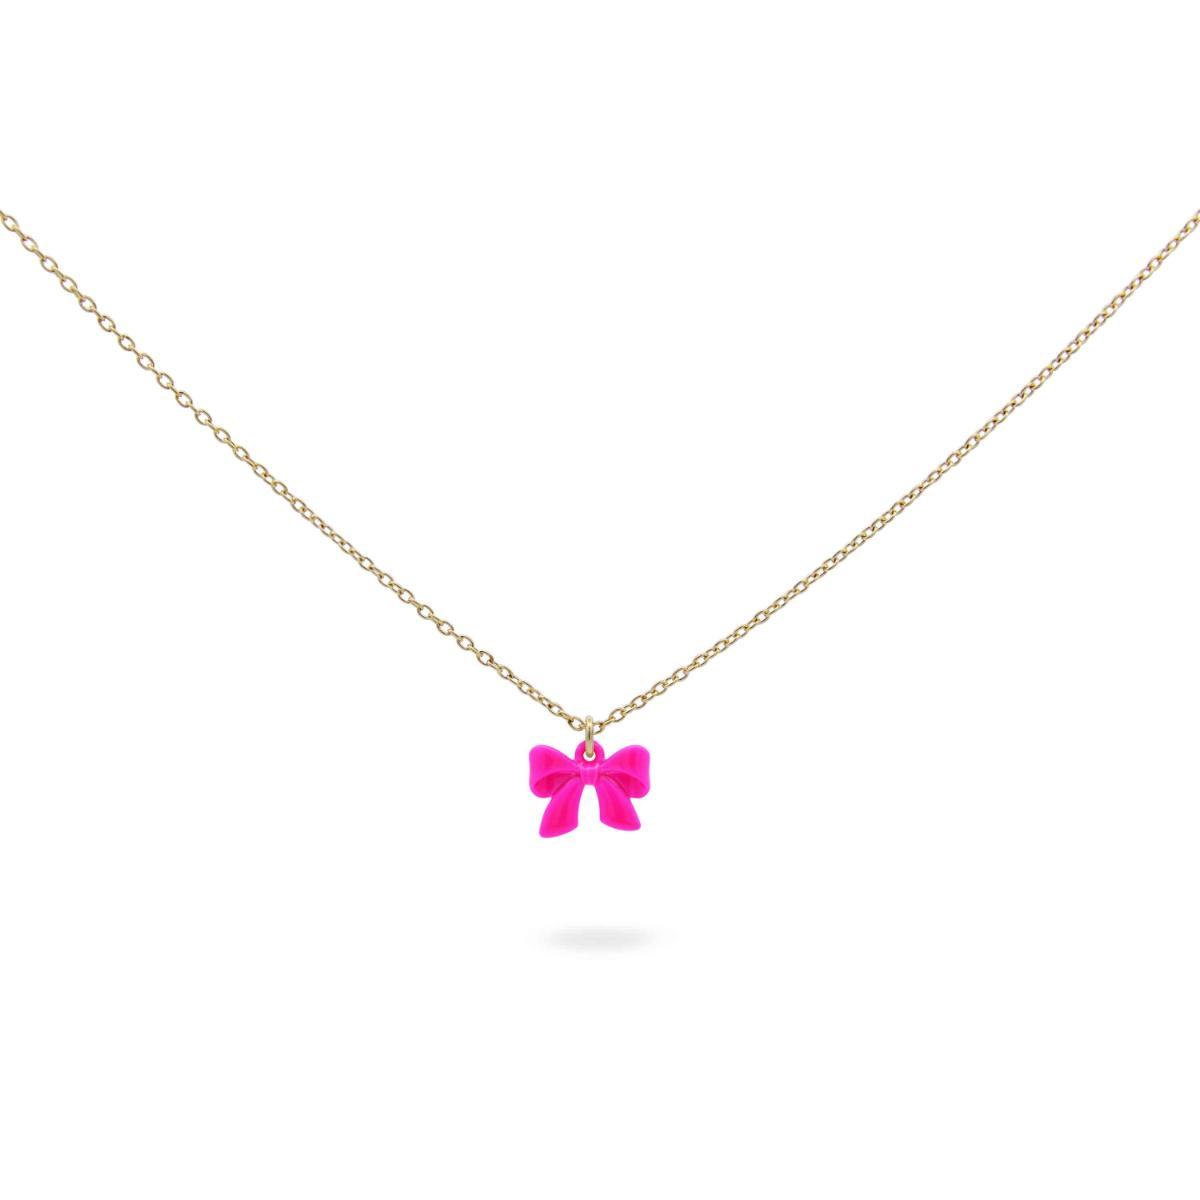 Necklace chic bow neon pink - CANDY BOW